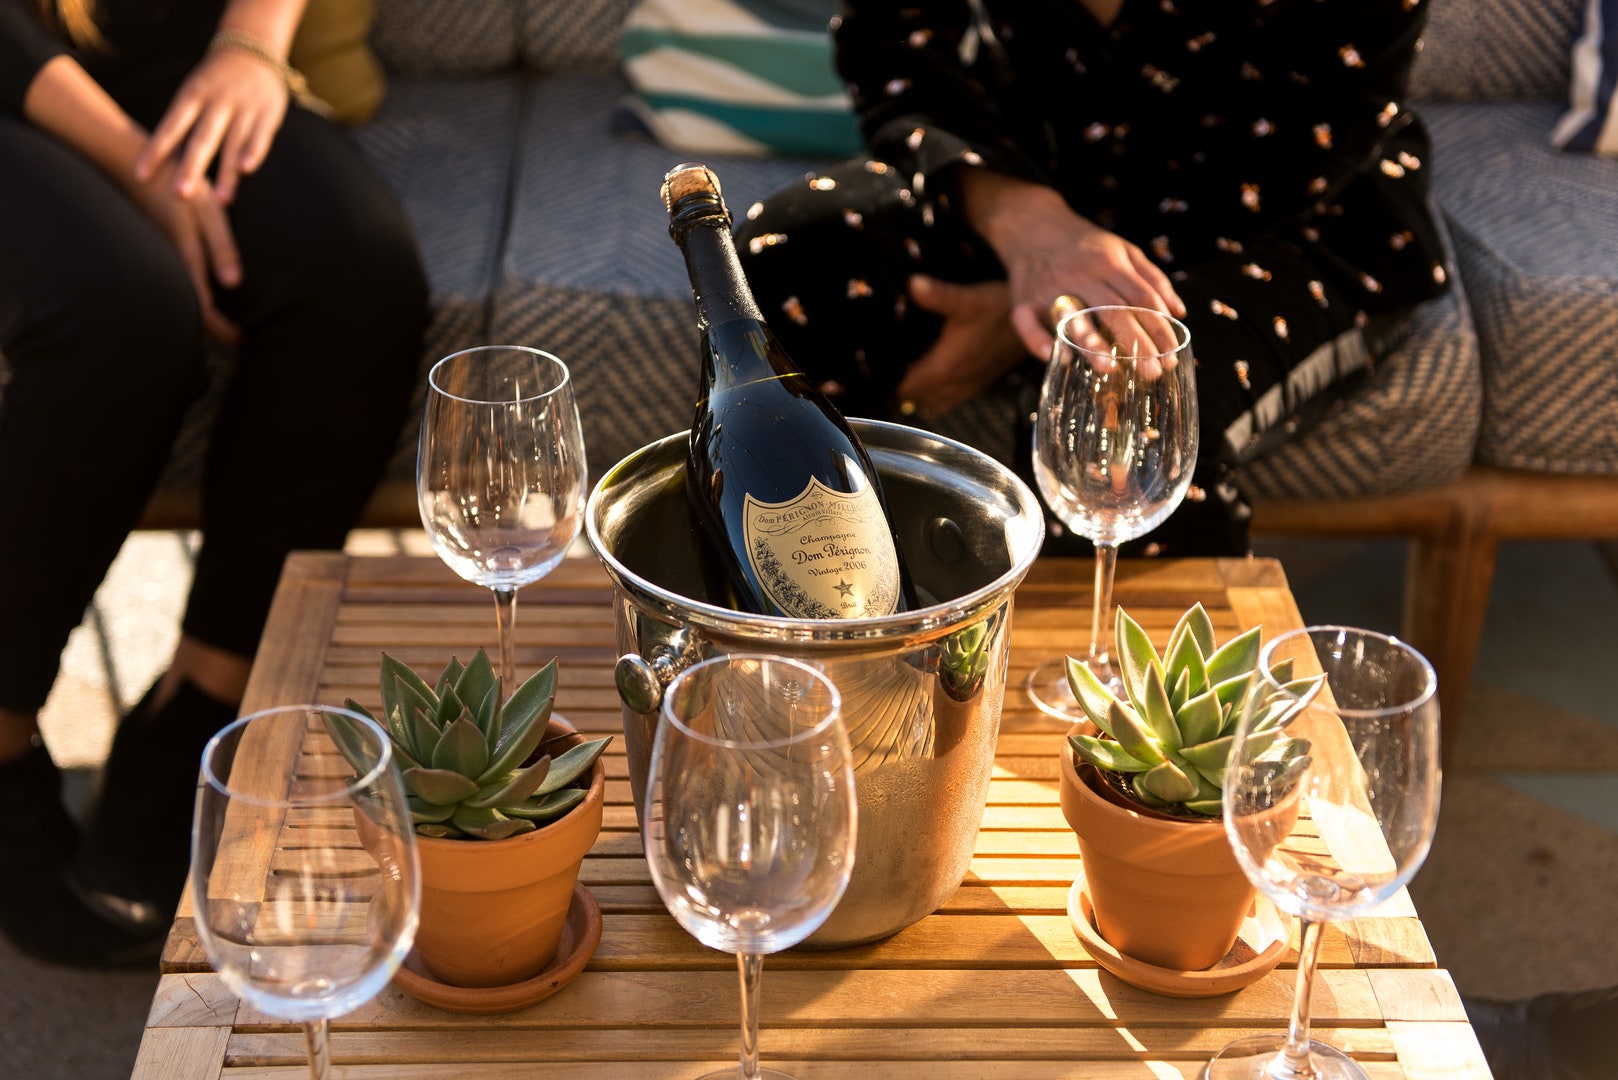 Chilled Champagne and wine glasses on the coffee table with succulents